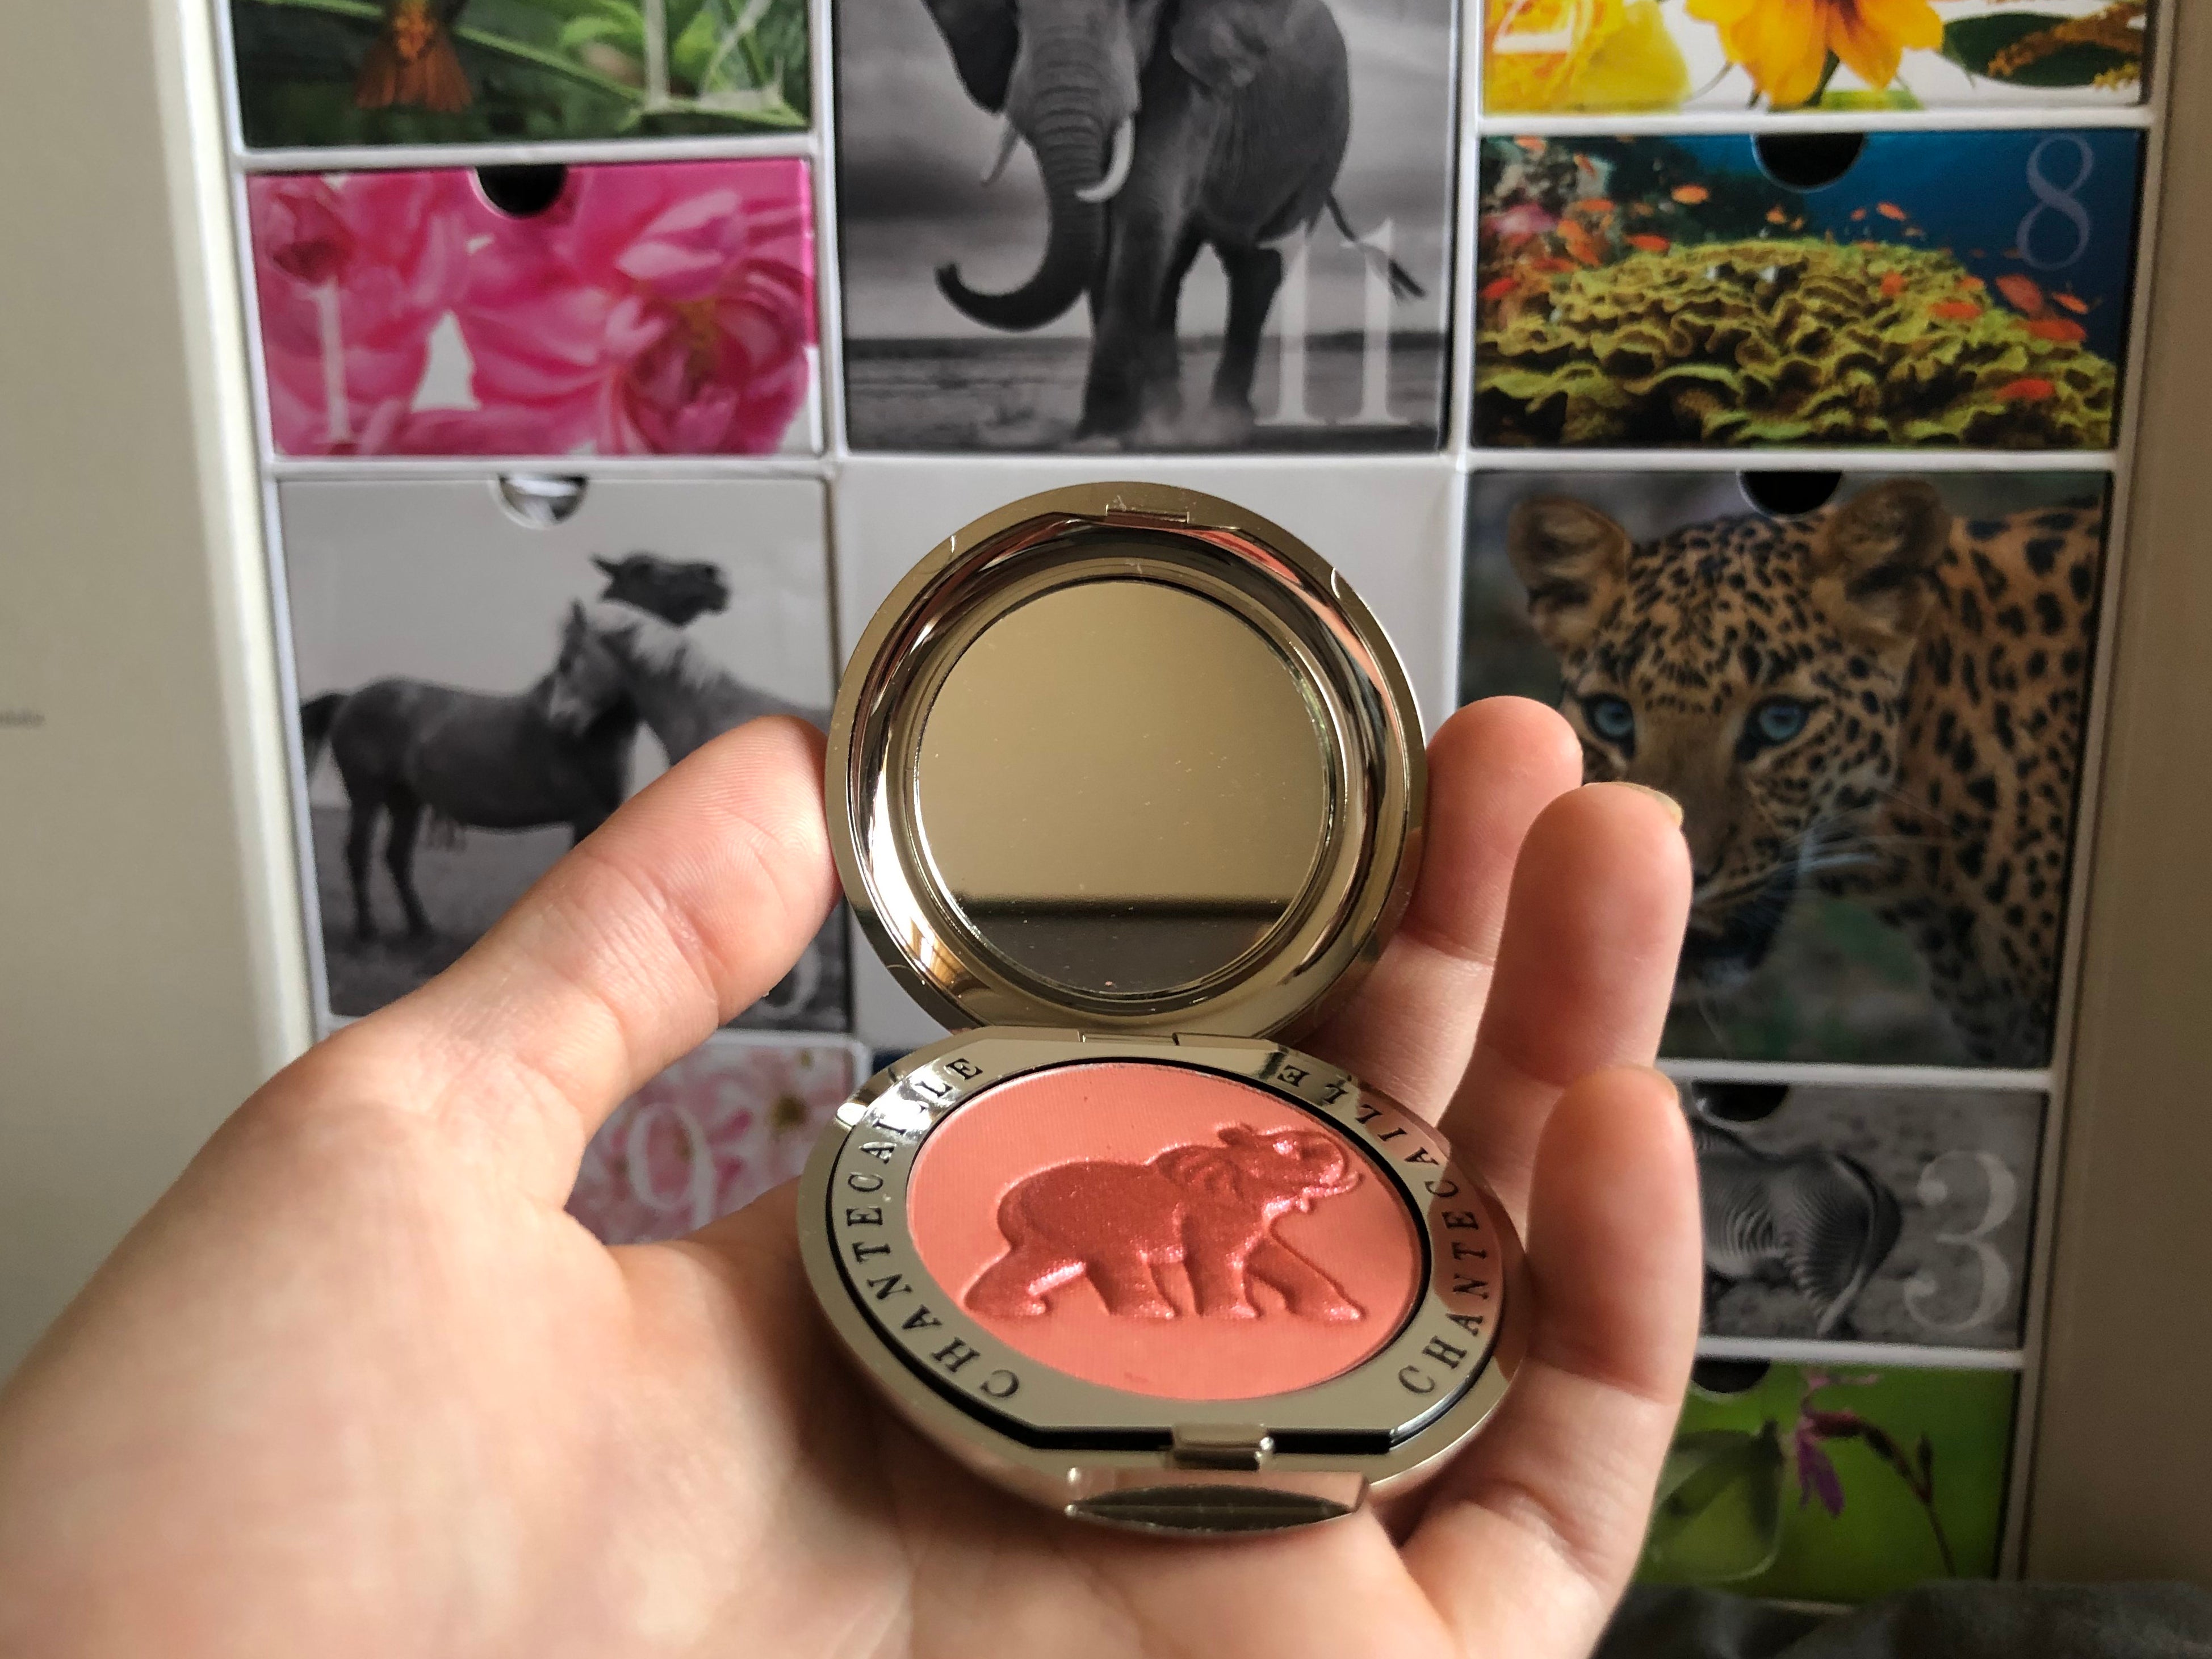 We’re a big fan of this peachy blush